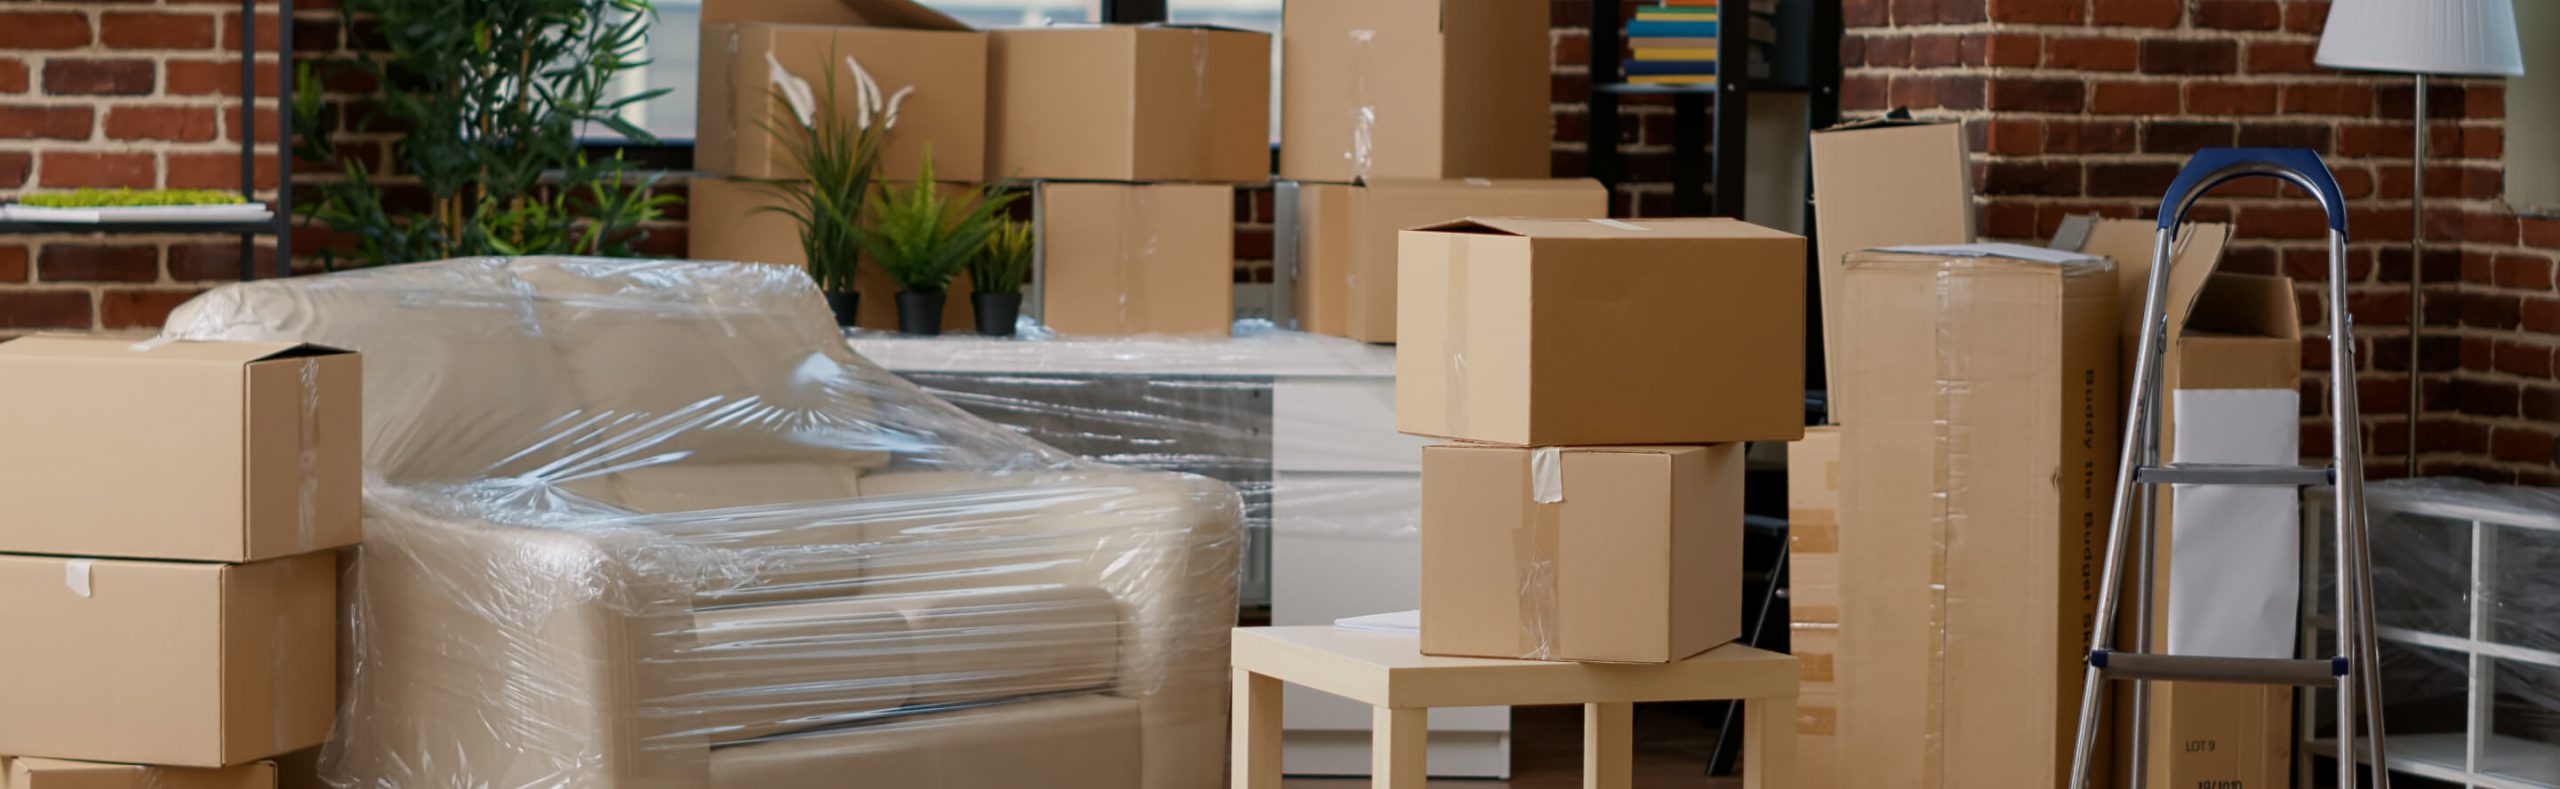 Packing & Unpacking services for all types of moves.